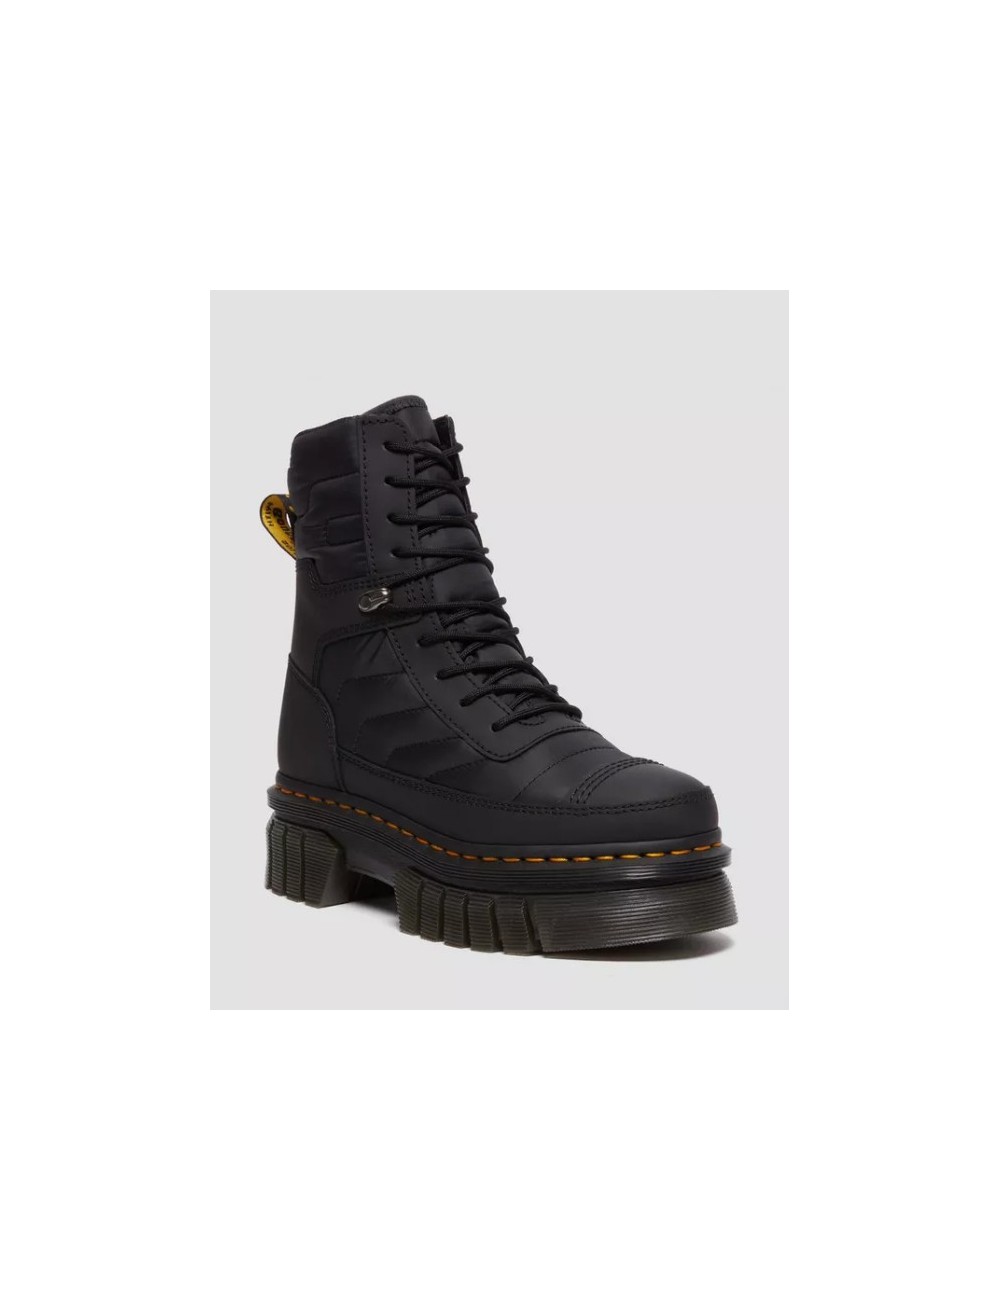 BOTAS DR. MARTENS AUDRICK 8I BOOT BLACK RUBBERISED LEATHER+WARM QUILTED UNISEX